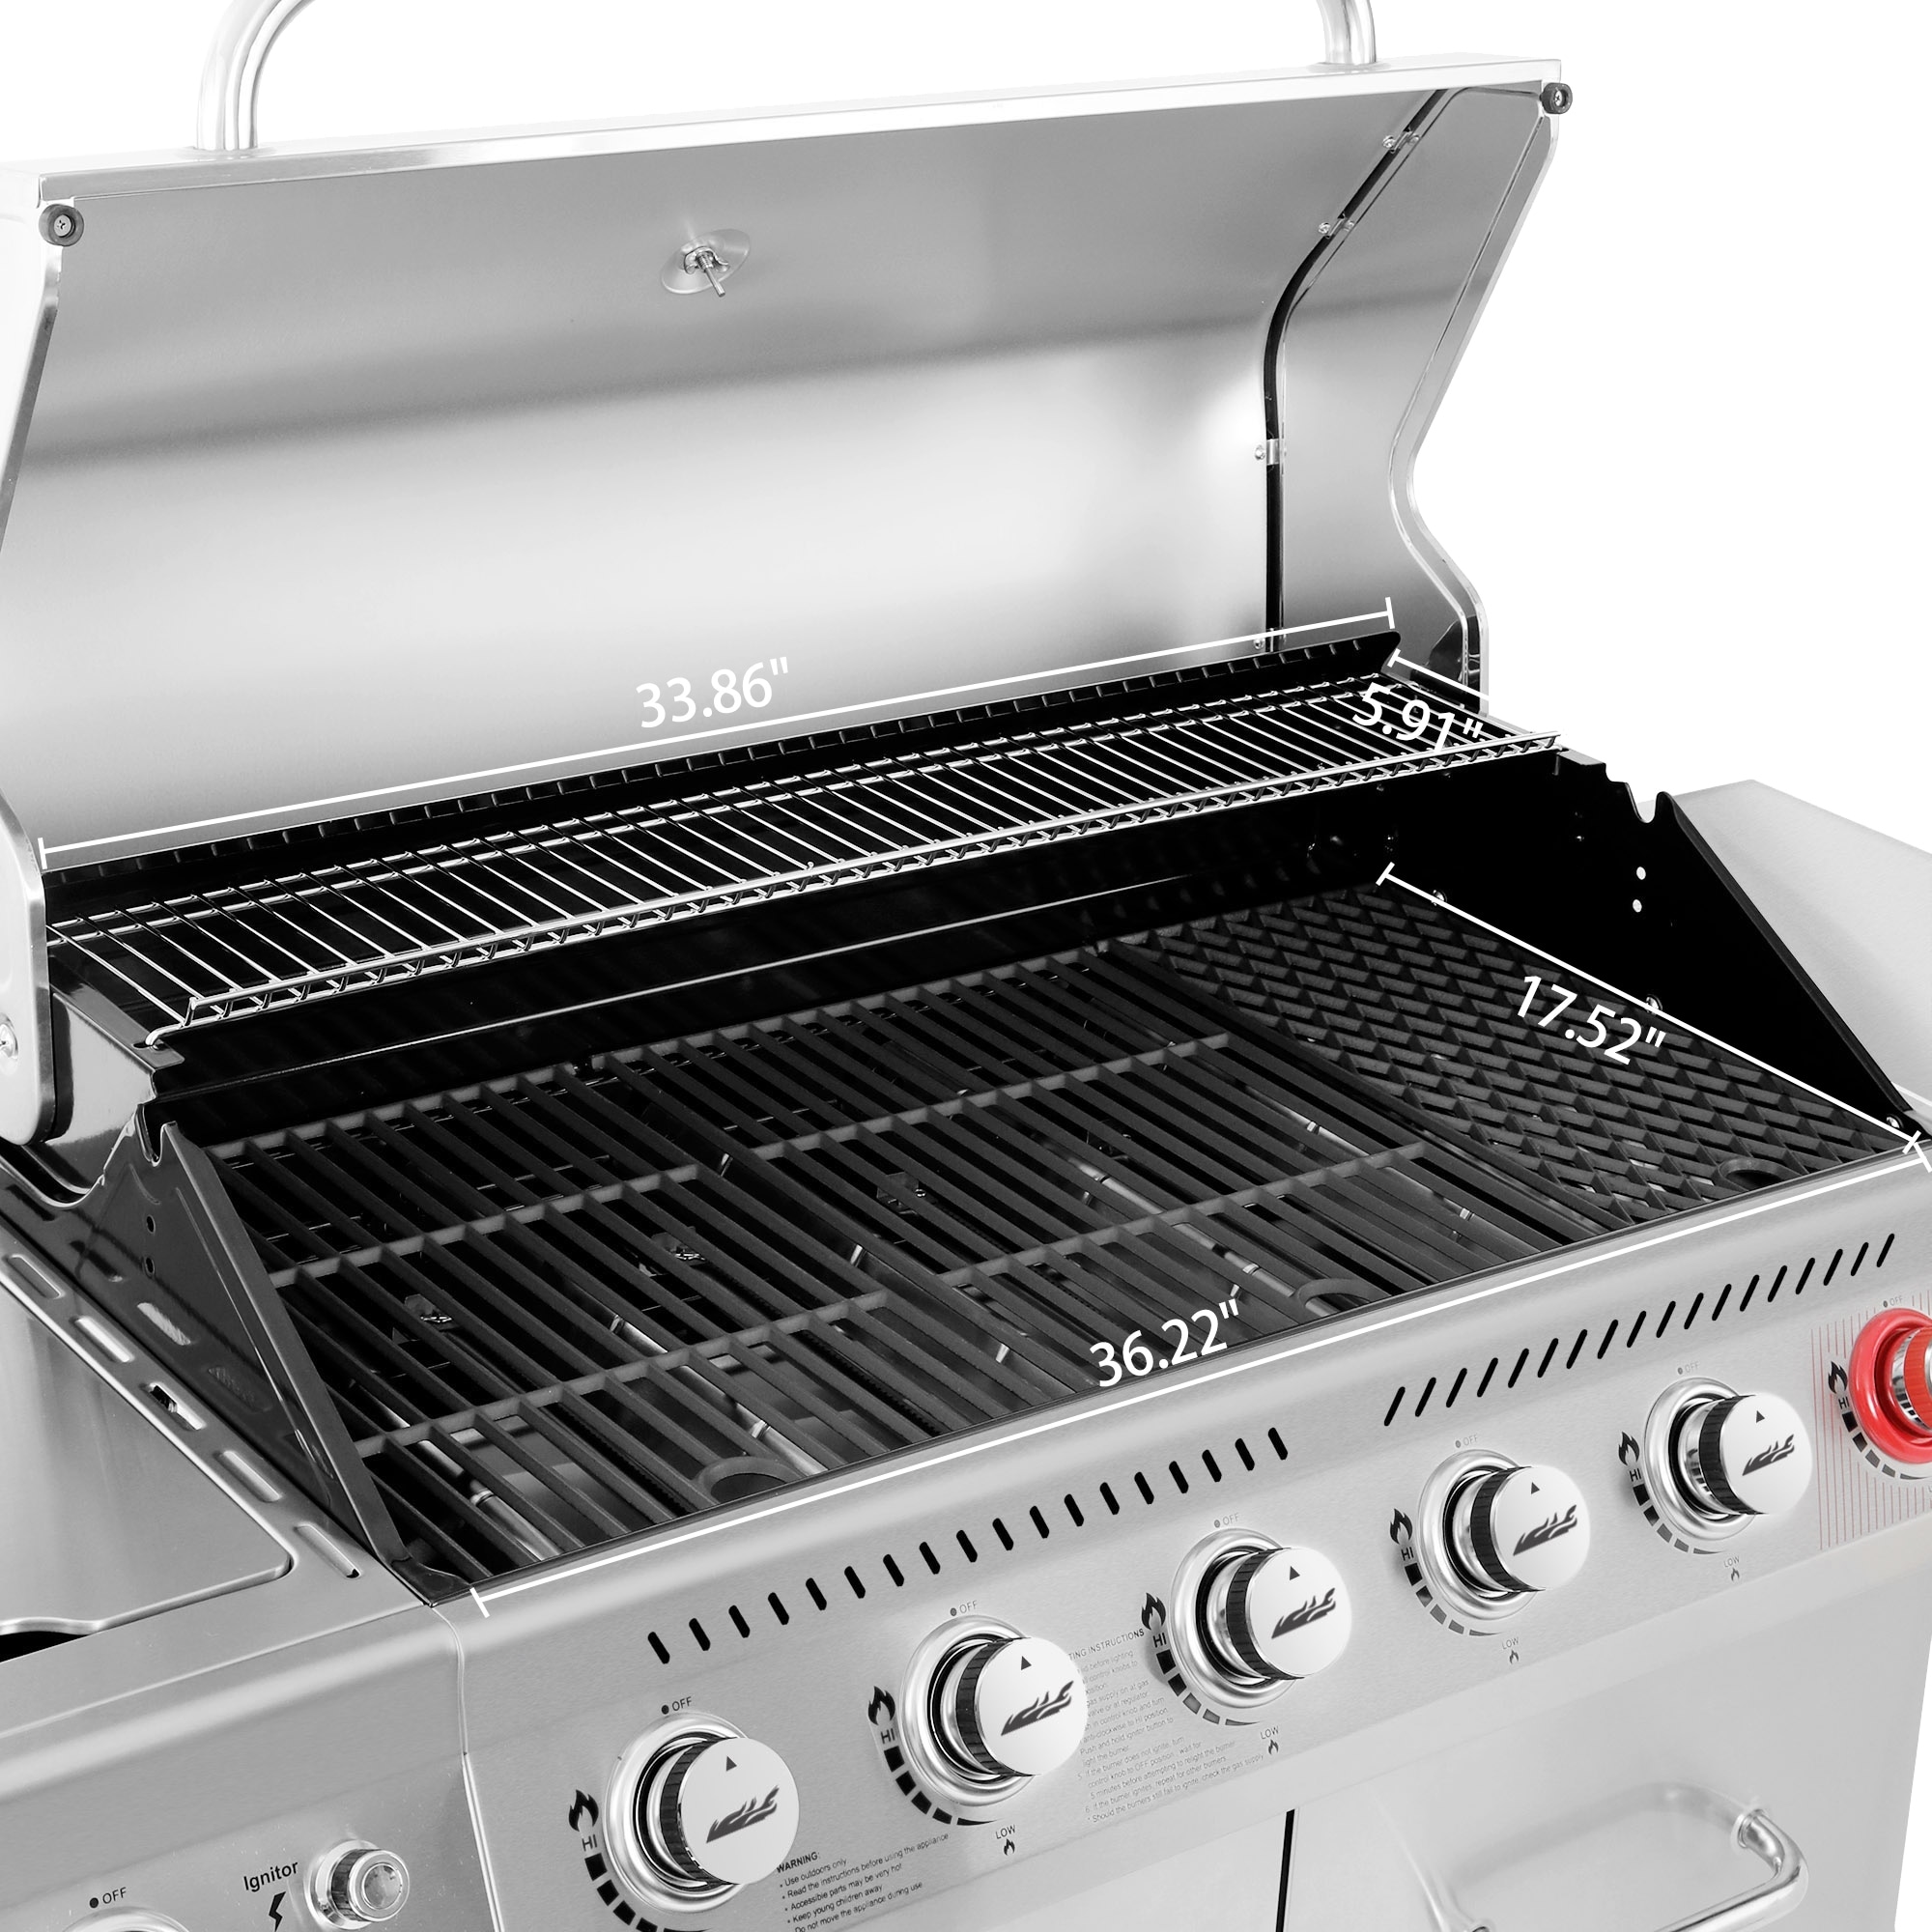 Burner Royal Sale Premier Stainless - On Beyond Gourmet Gas - Sear Burner, and - Silver & 6-Burner Grill Steel BBQ Side Bath with Bed 36898562 Grill,